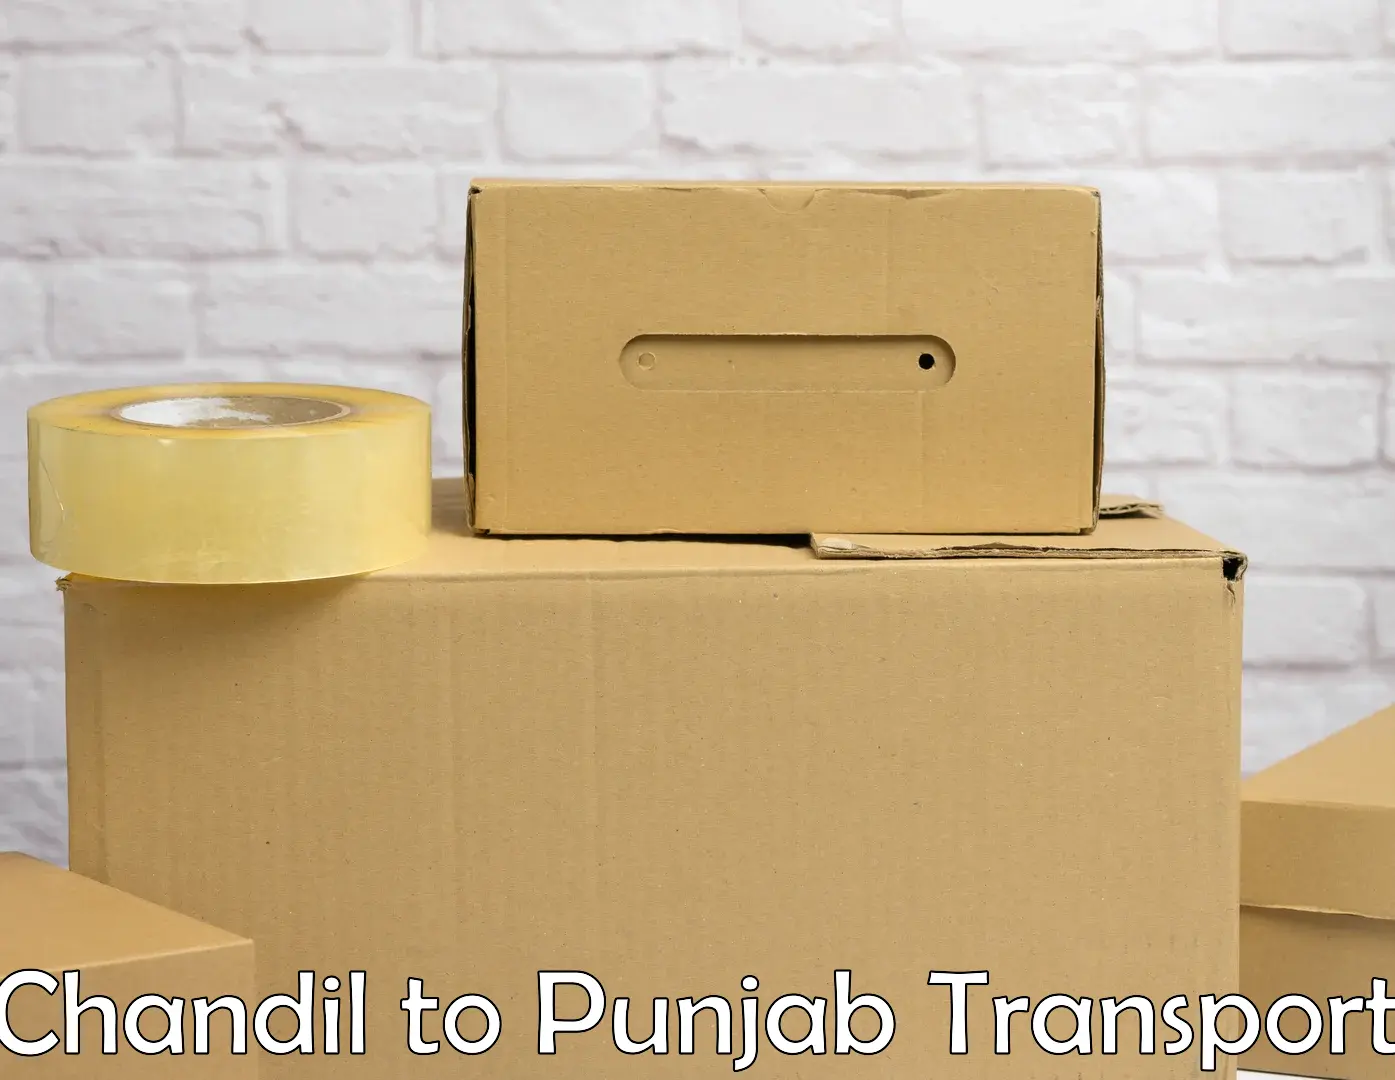 Container transport service Chandil to Anandpur Sahib